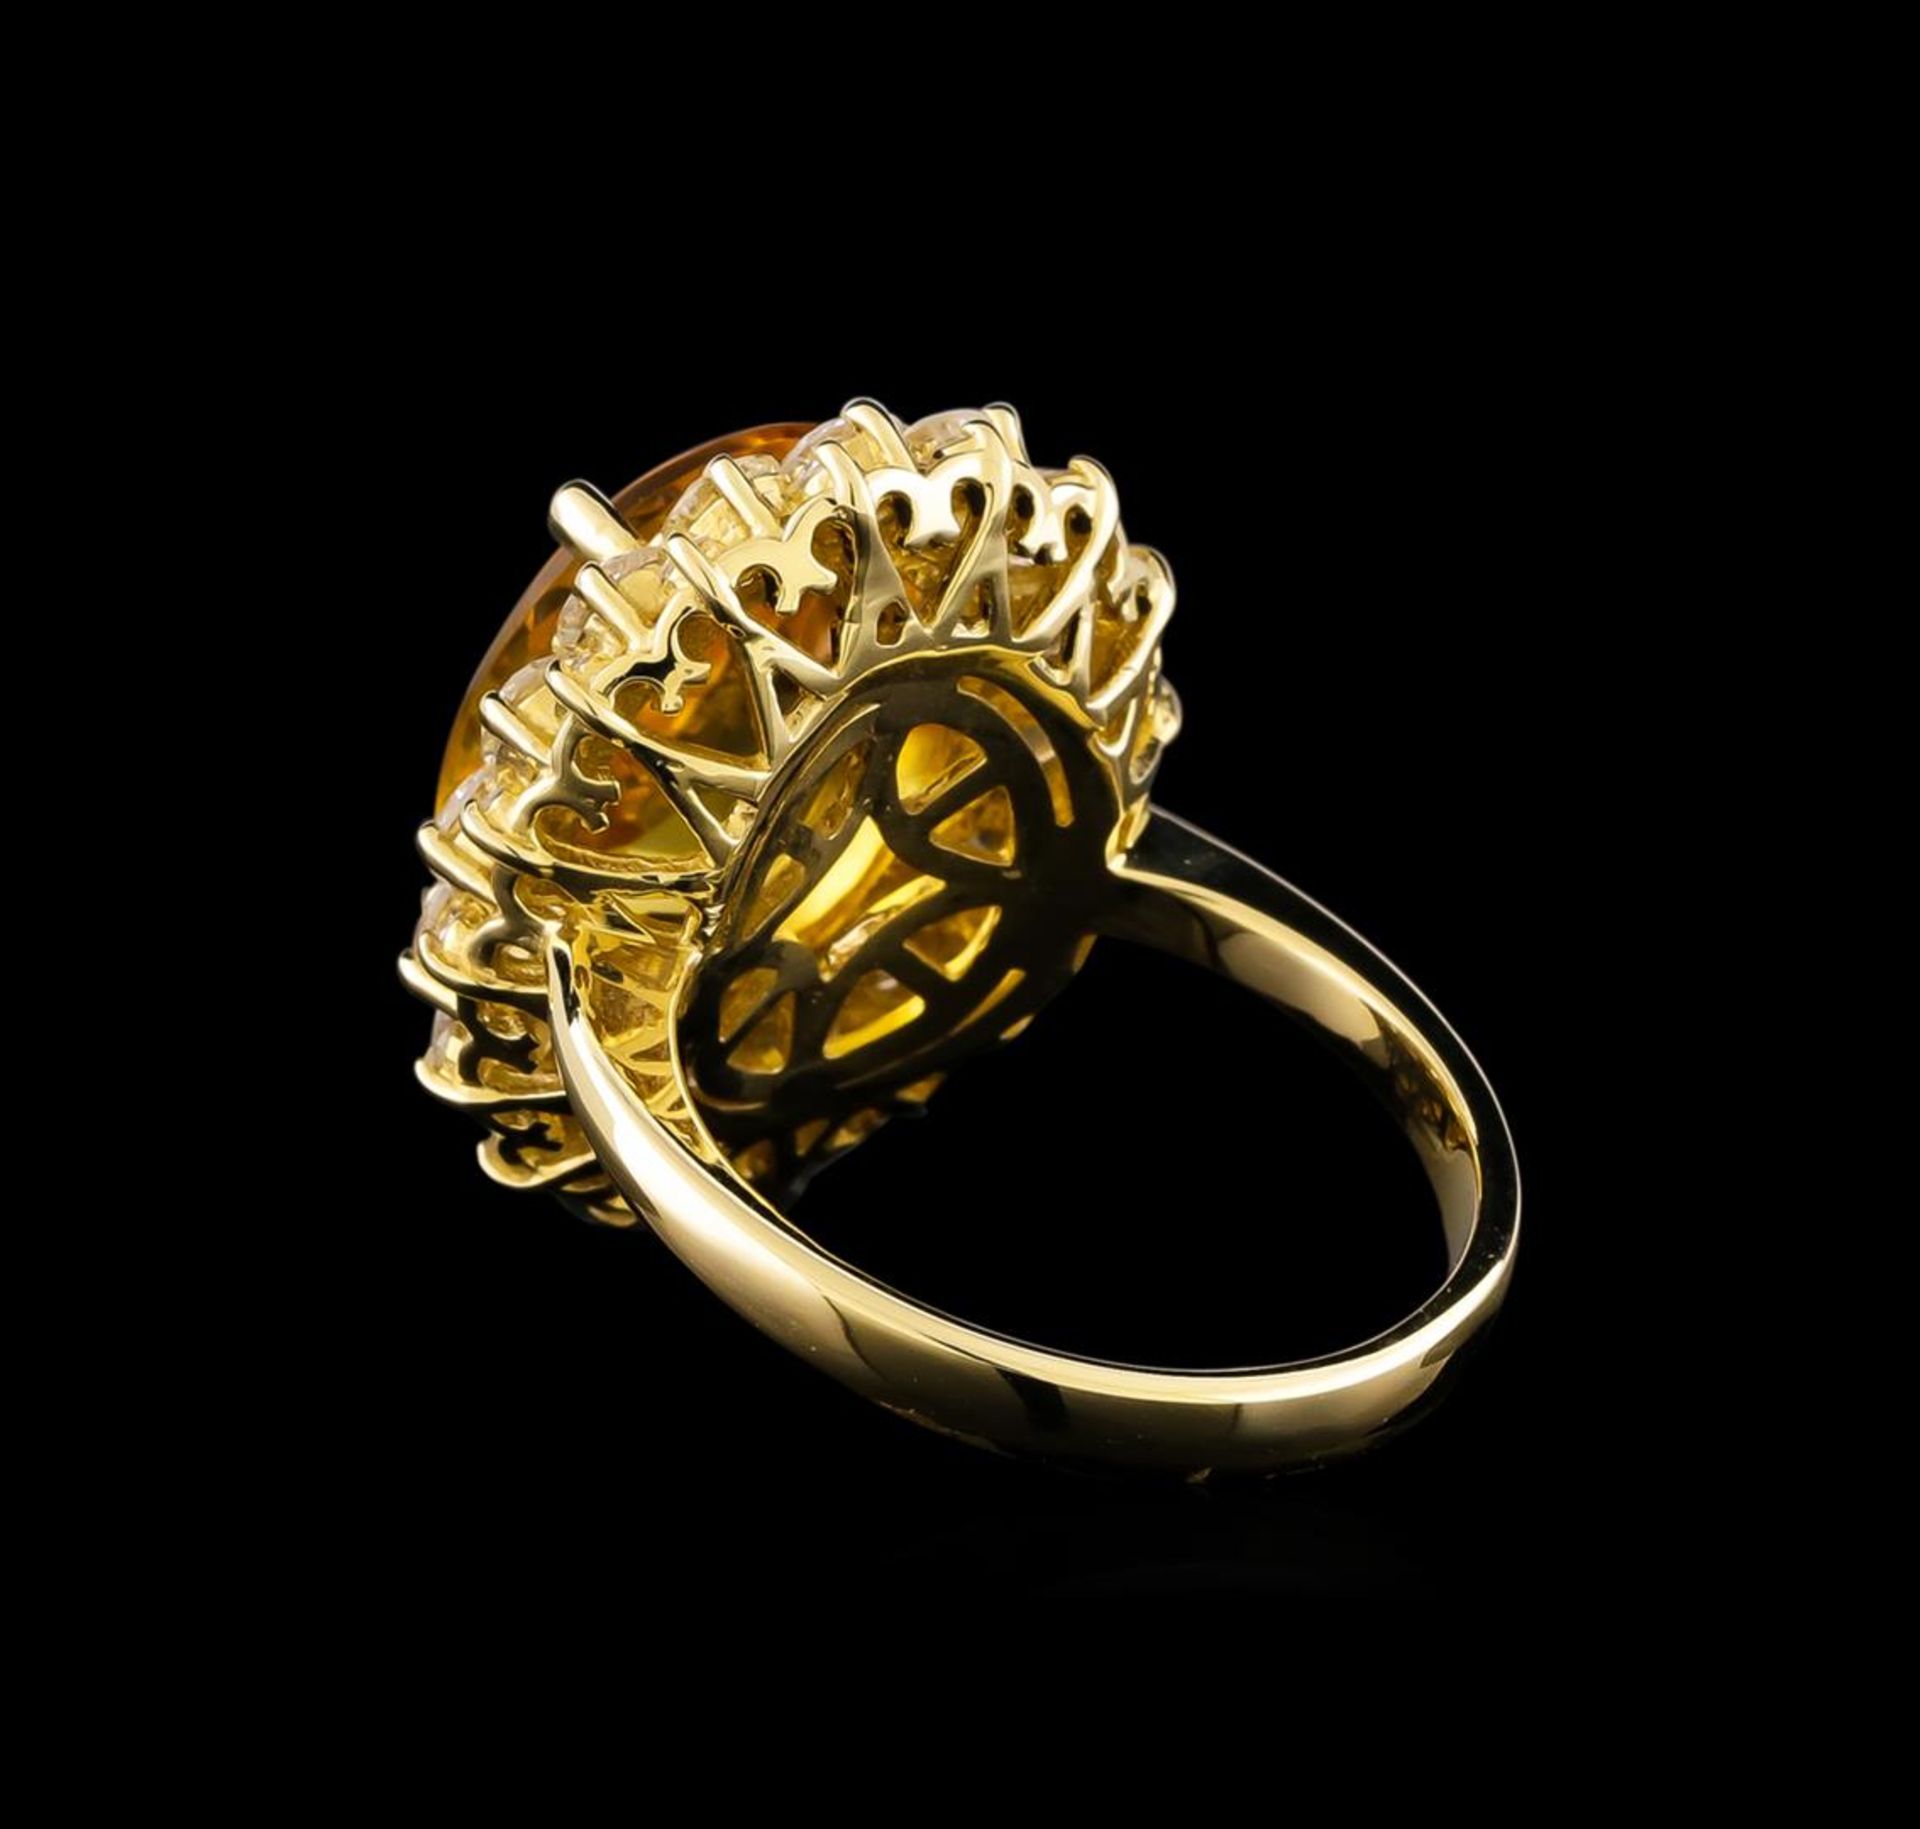 14KT Yellow Gold 6.17 ctw Citrine and Diamond Ring - Image 3 of 5